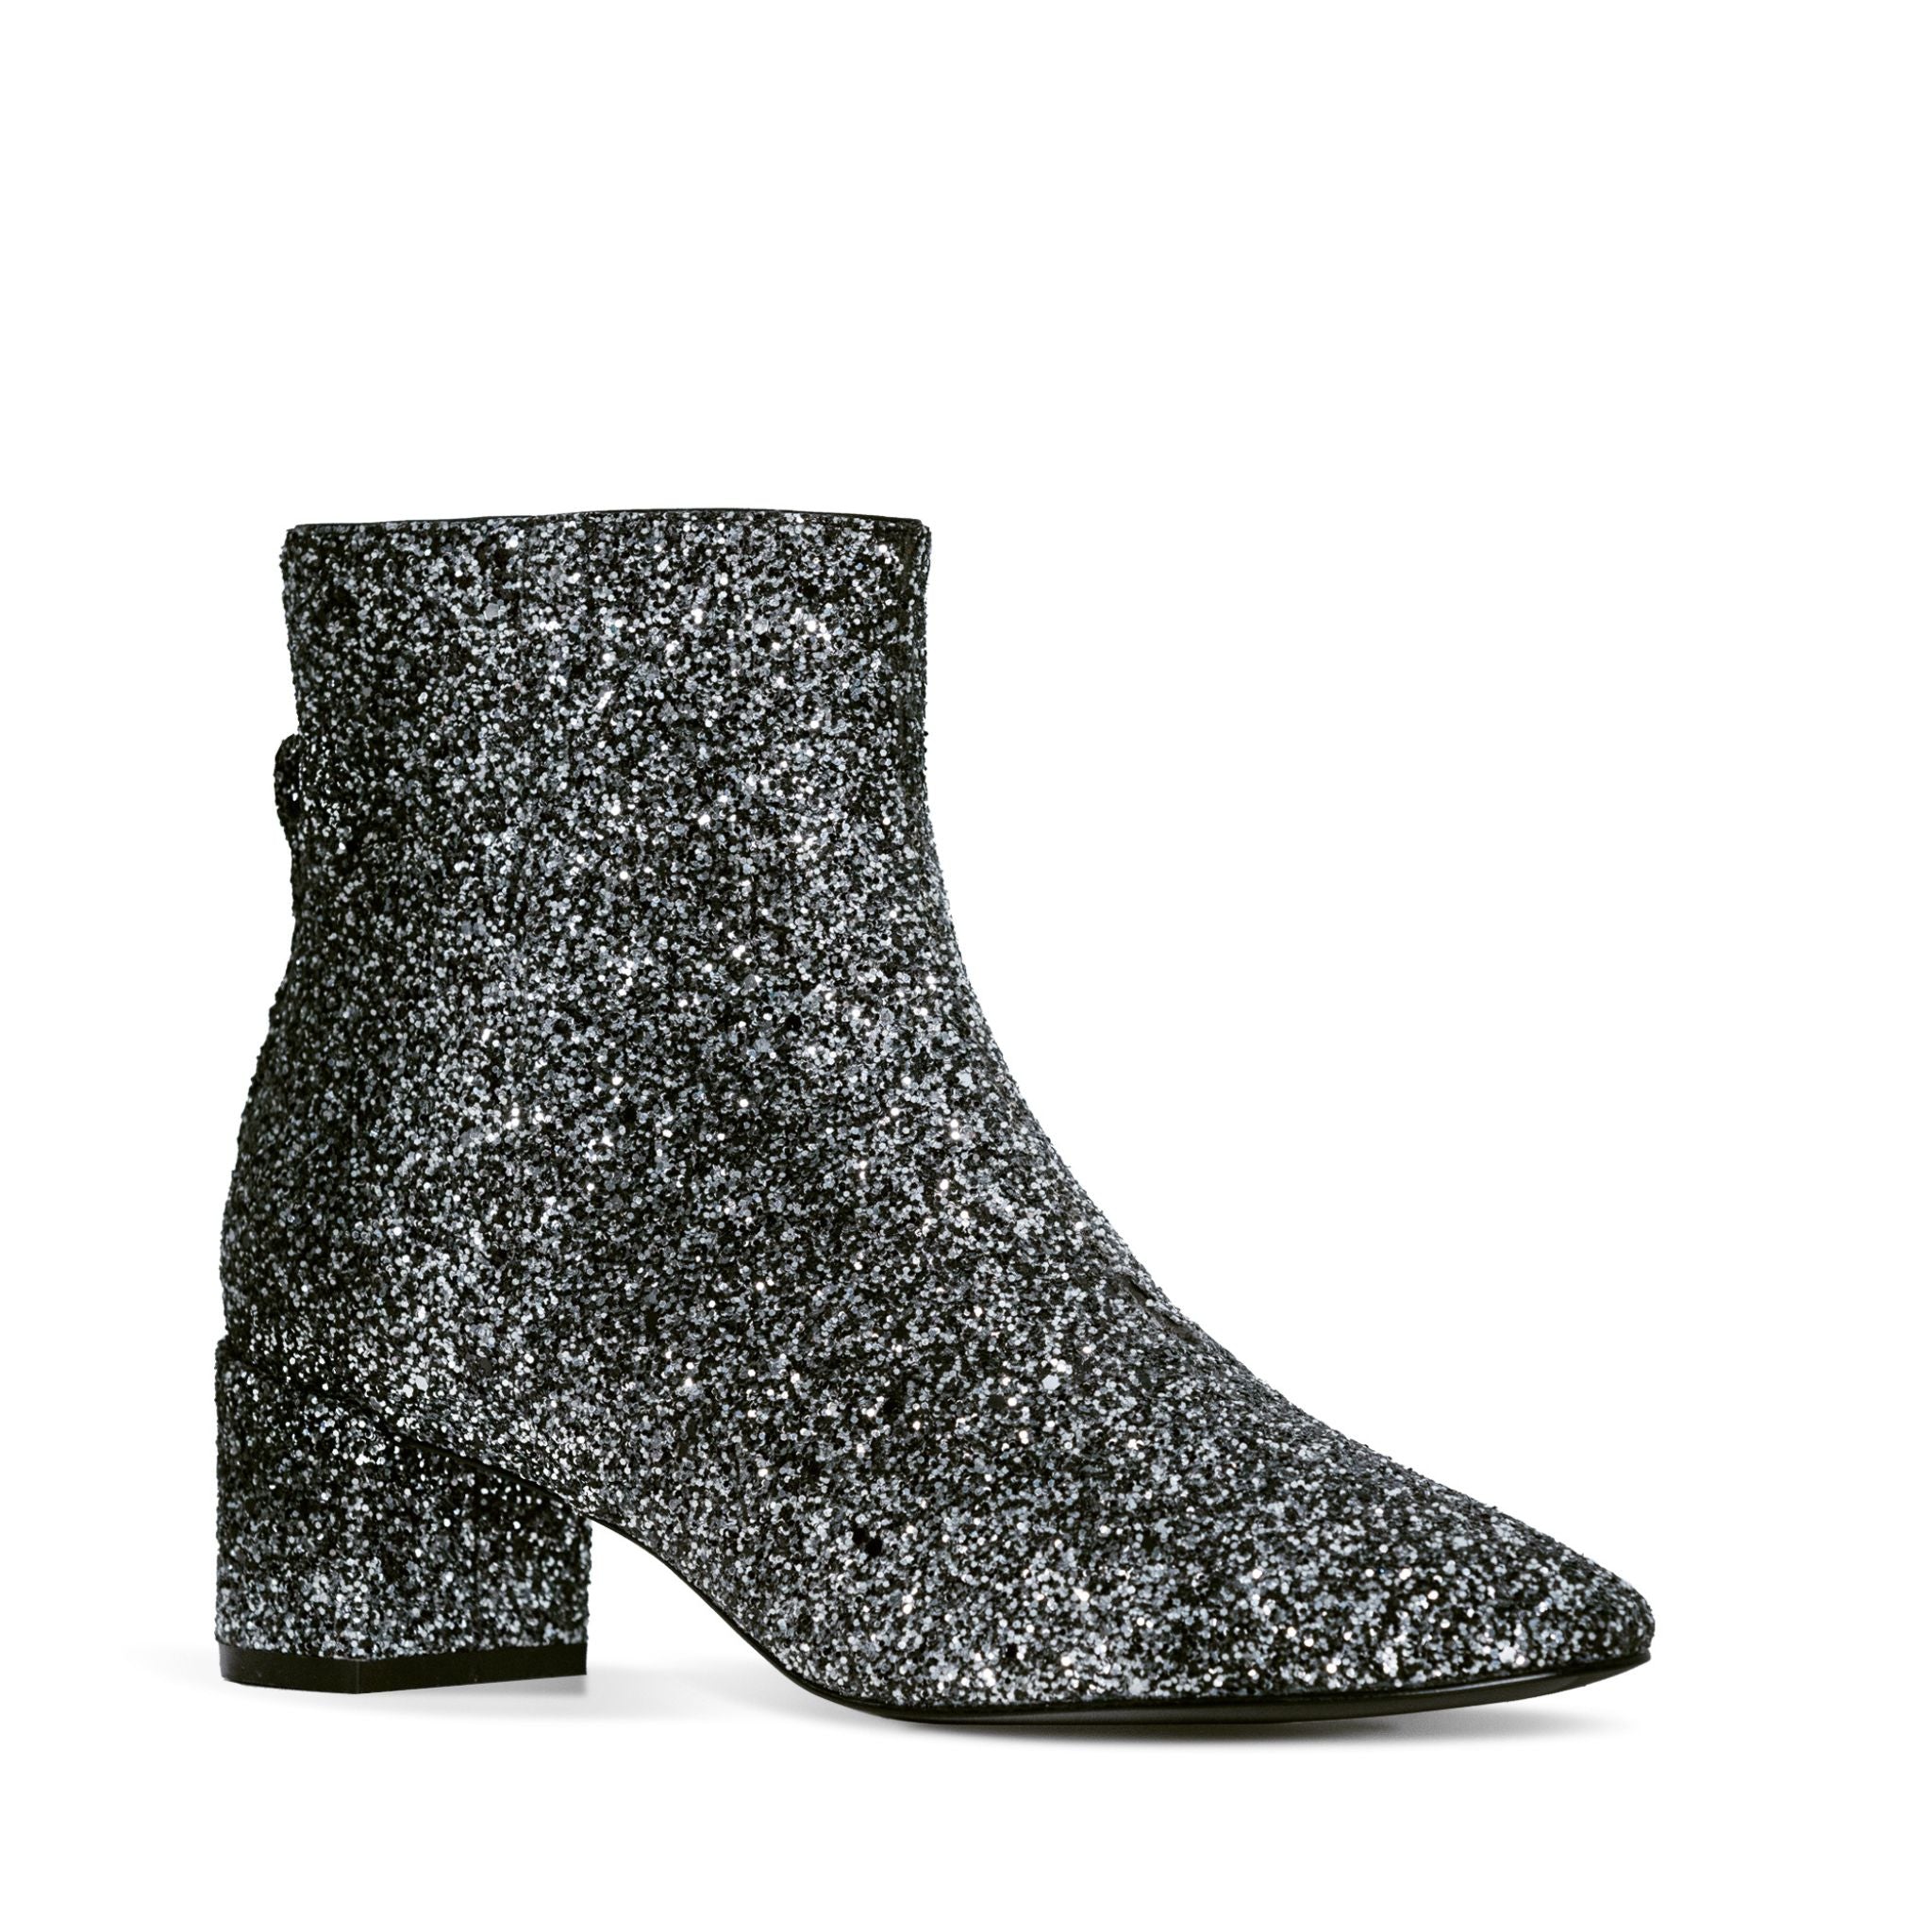 HEDY Ankle Boots in Diamond Dust Glitter- Sustainable Vegan Recycled ...